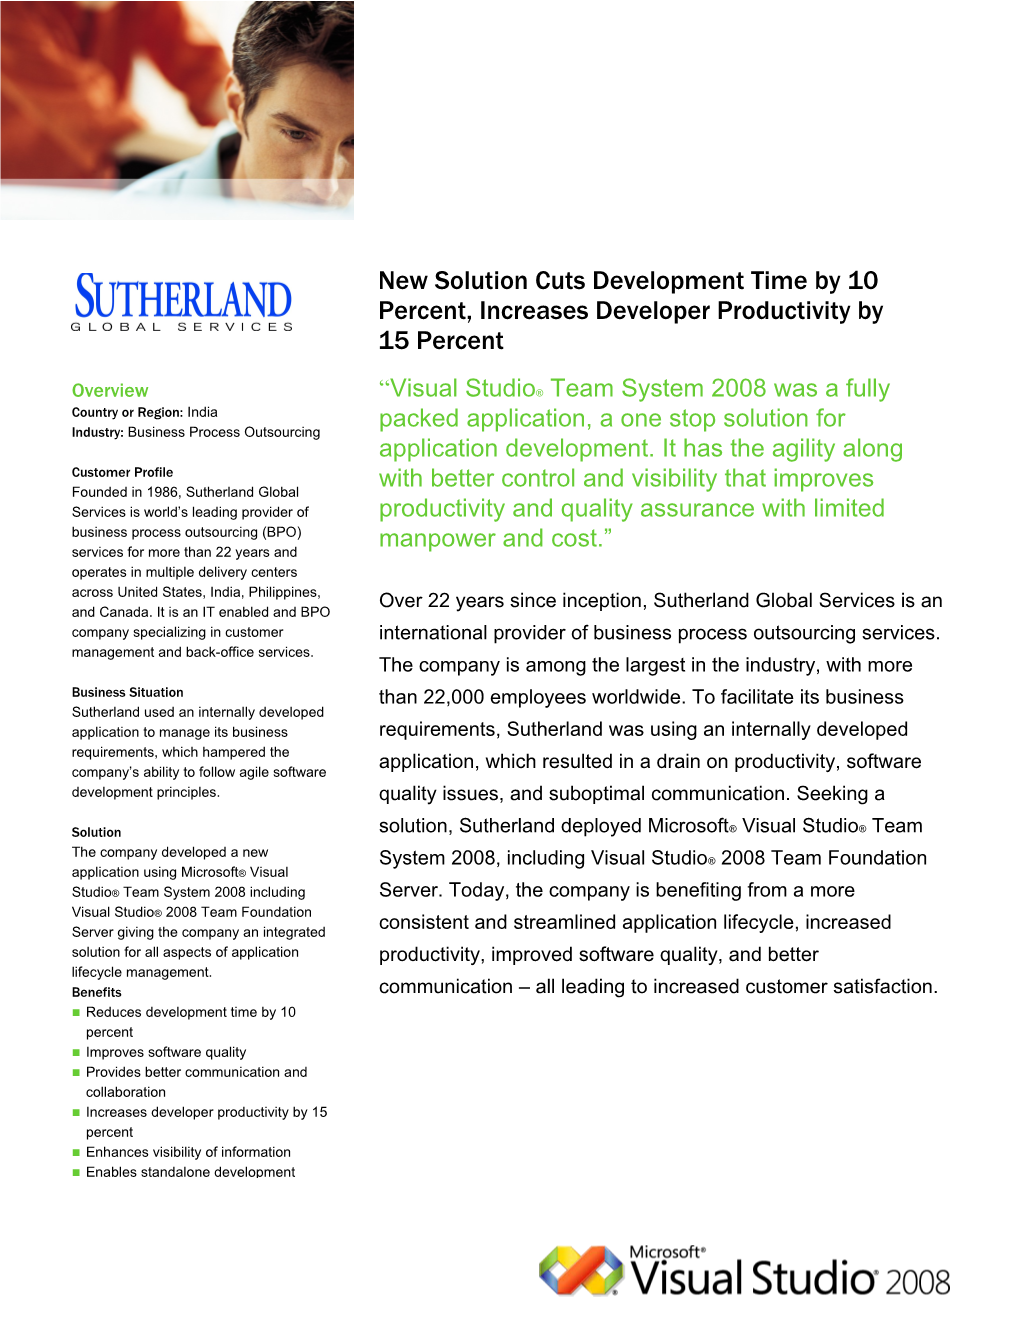 New Solution Cuts Development Time by 10 Percent, Increases Developer Productivity by 15 Percent